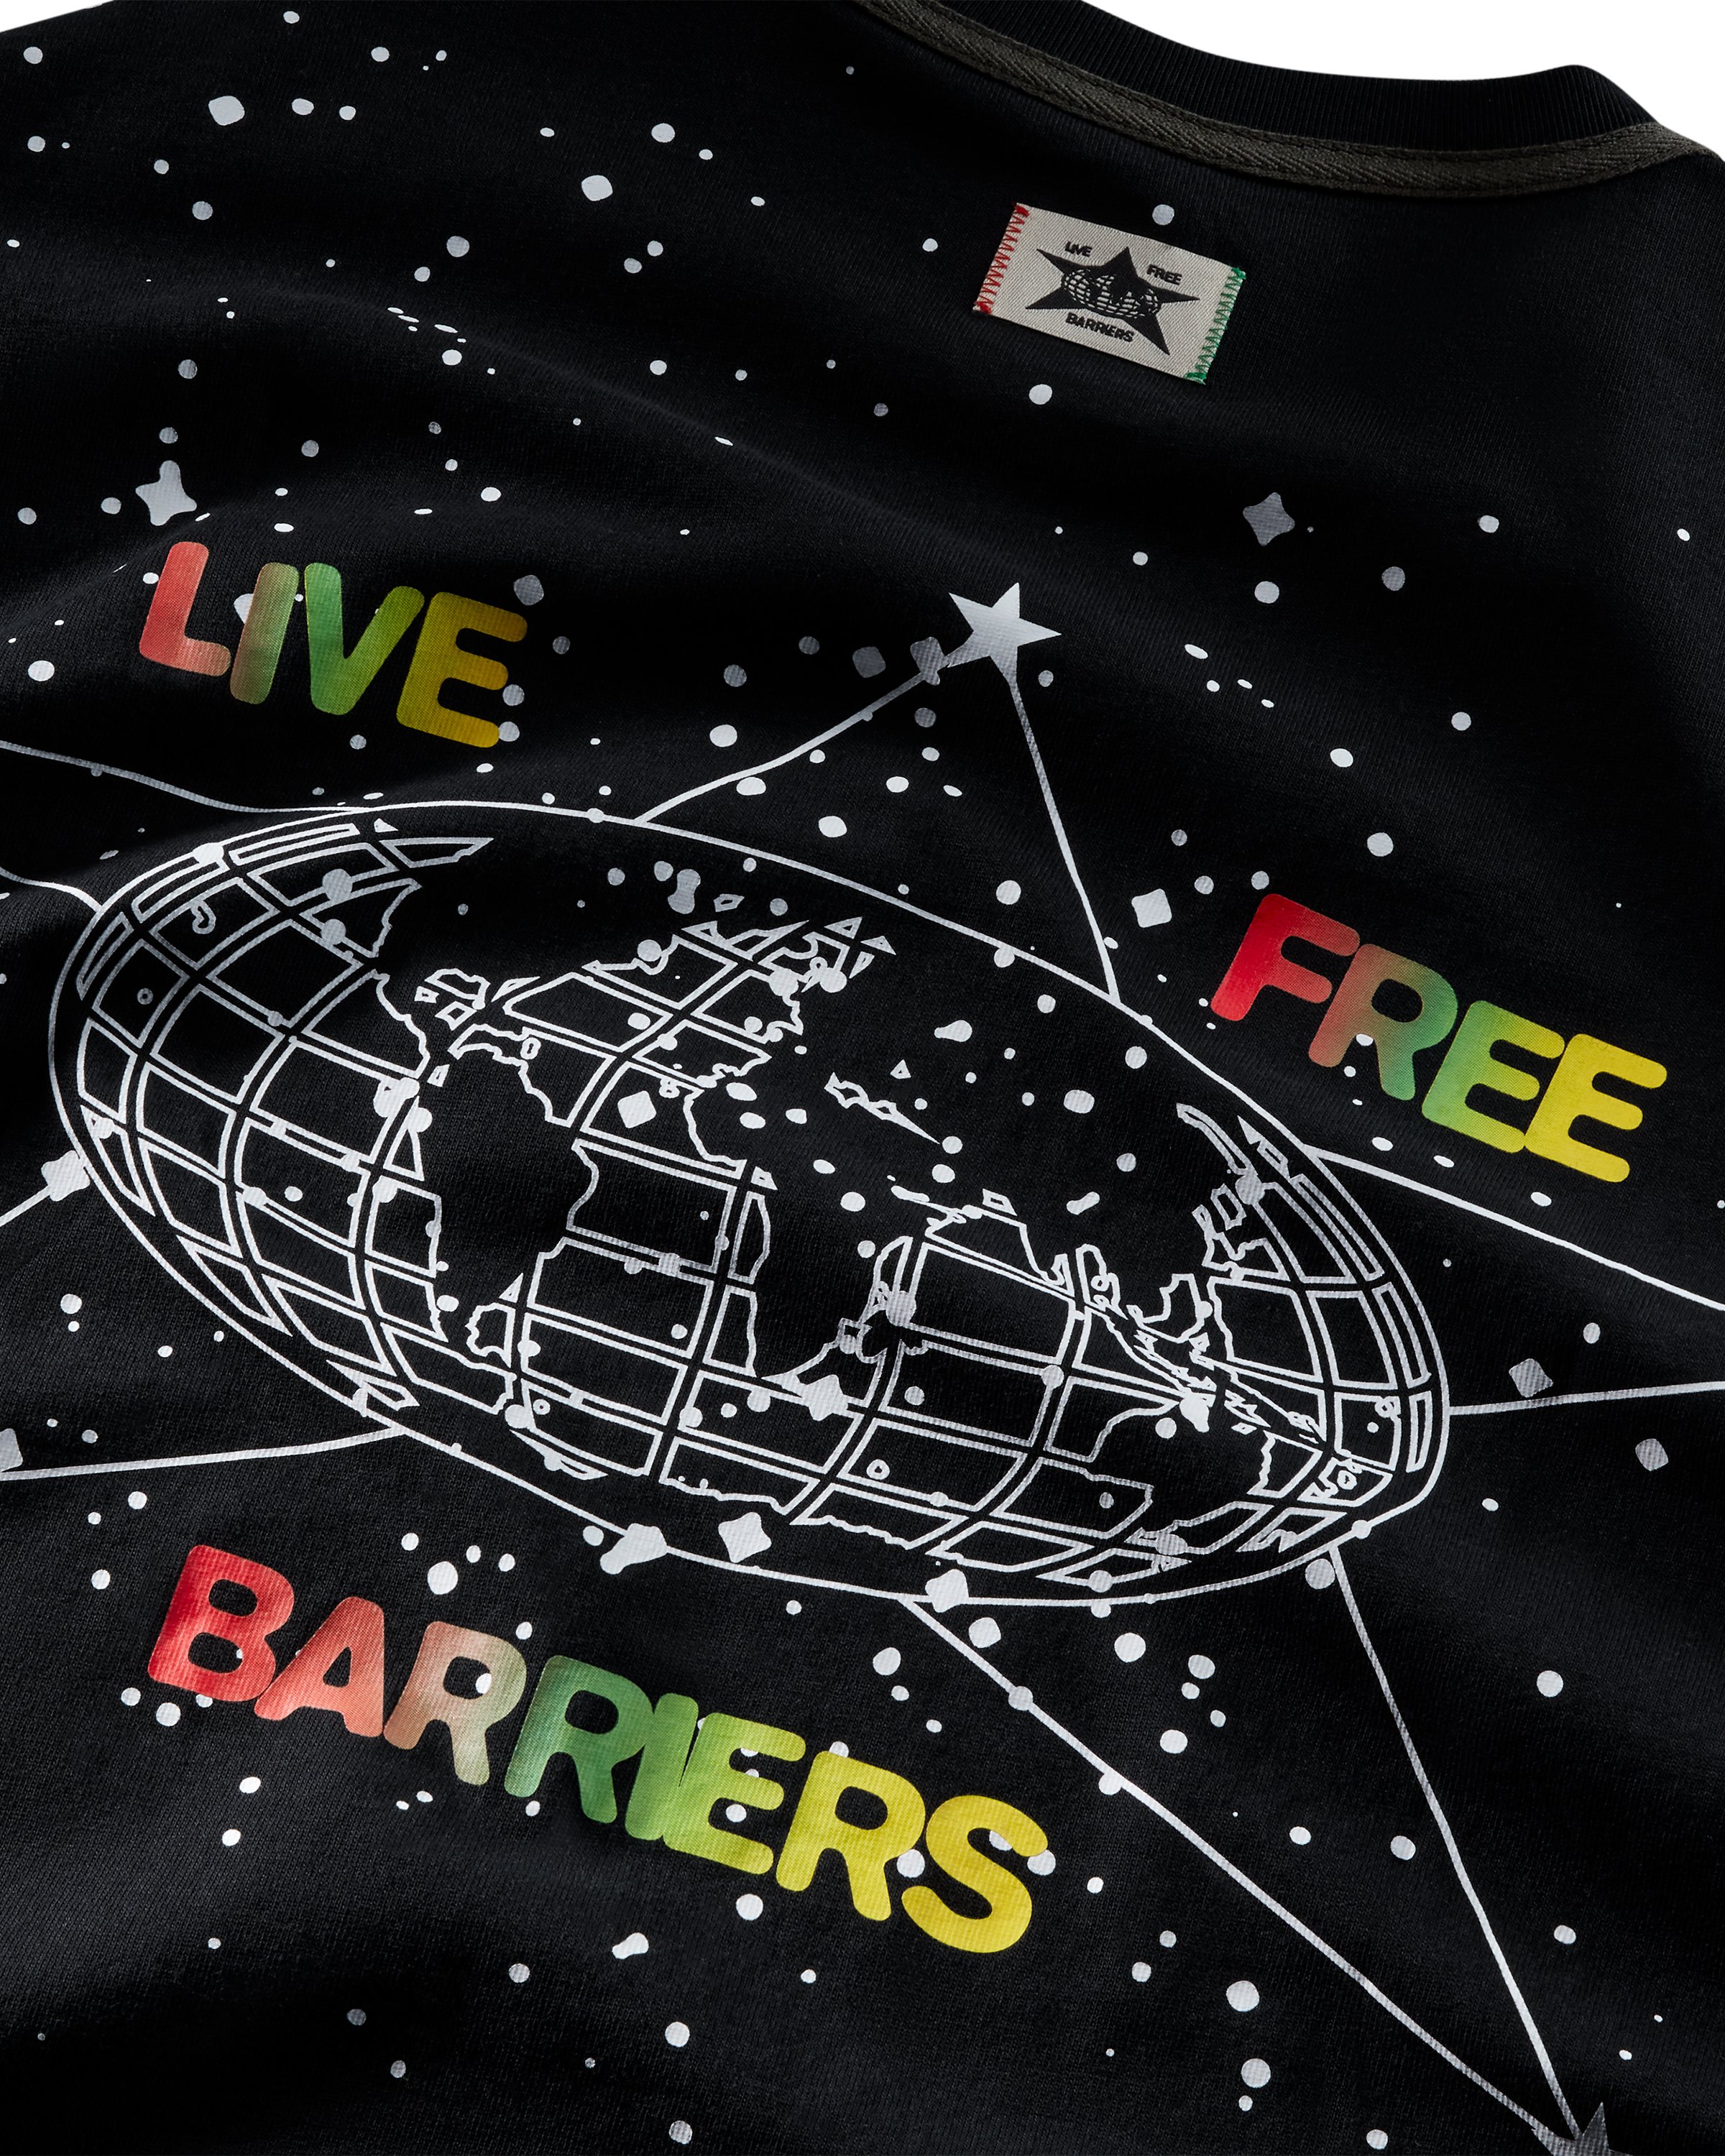 Converse x Barriers - Court Ready Crossover Tee Black - Clothing - Black - Image 6